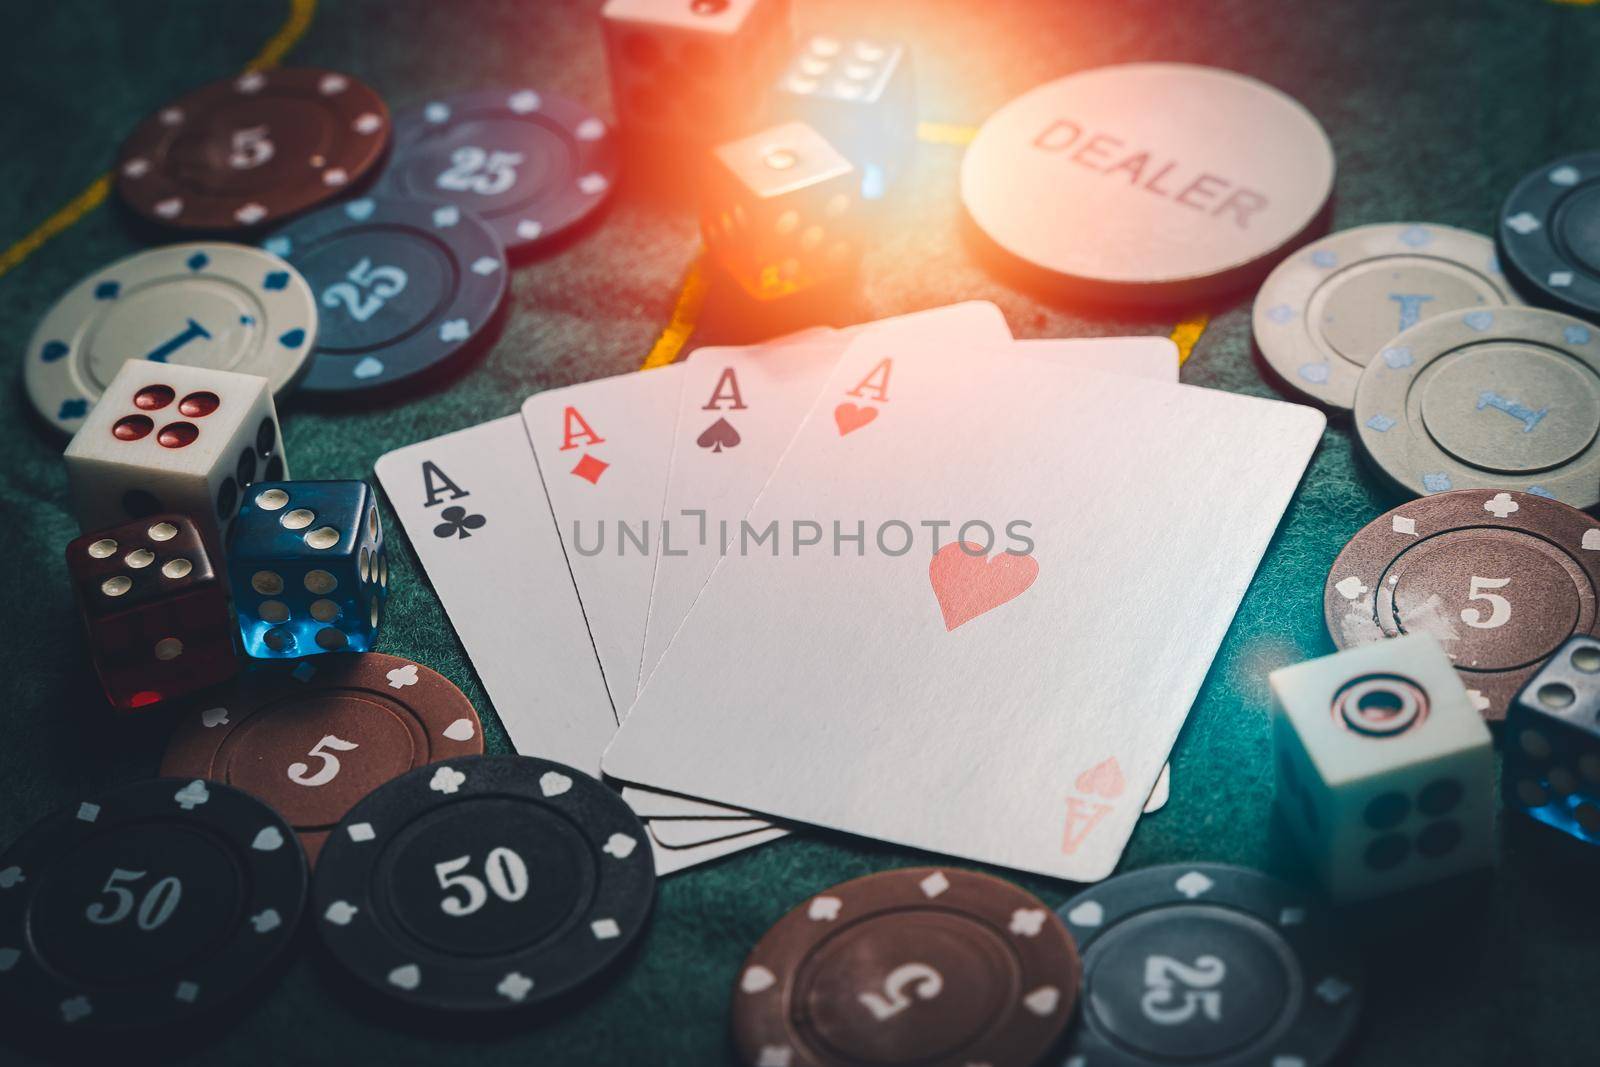 close-up playing chips and playing cards. casino poker game concept. Playing cards, poker chips, and dices on green table. the view from the top by Wmpix